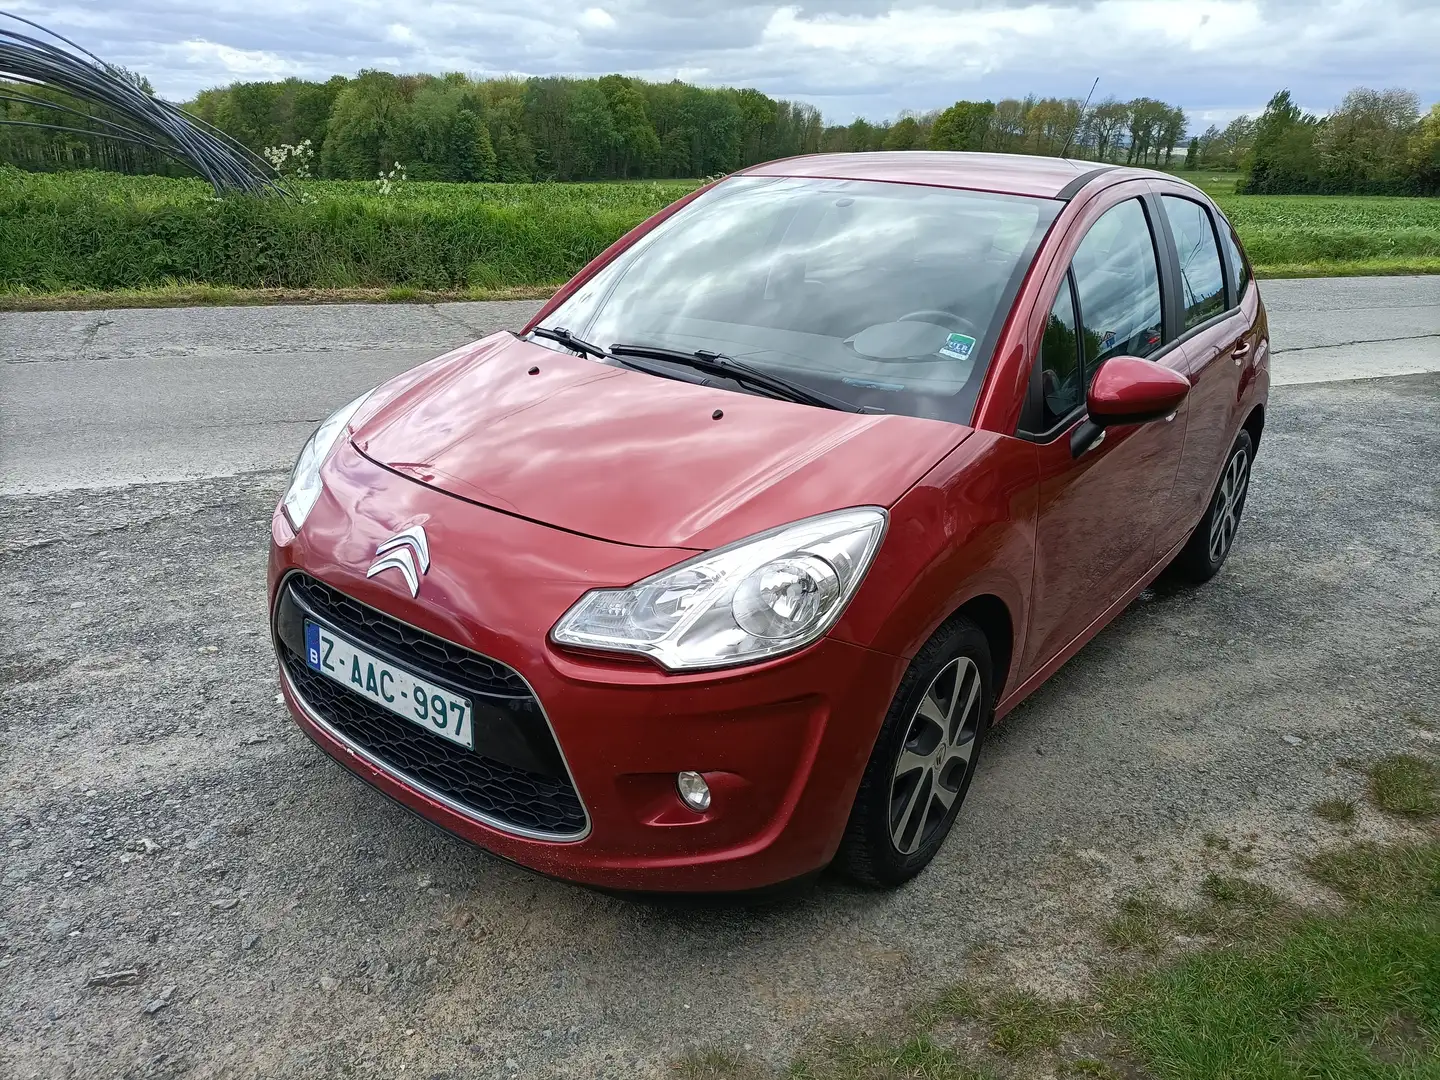 Citroen C3 1.4 HDi Collection 167957 km Rouge - 1